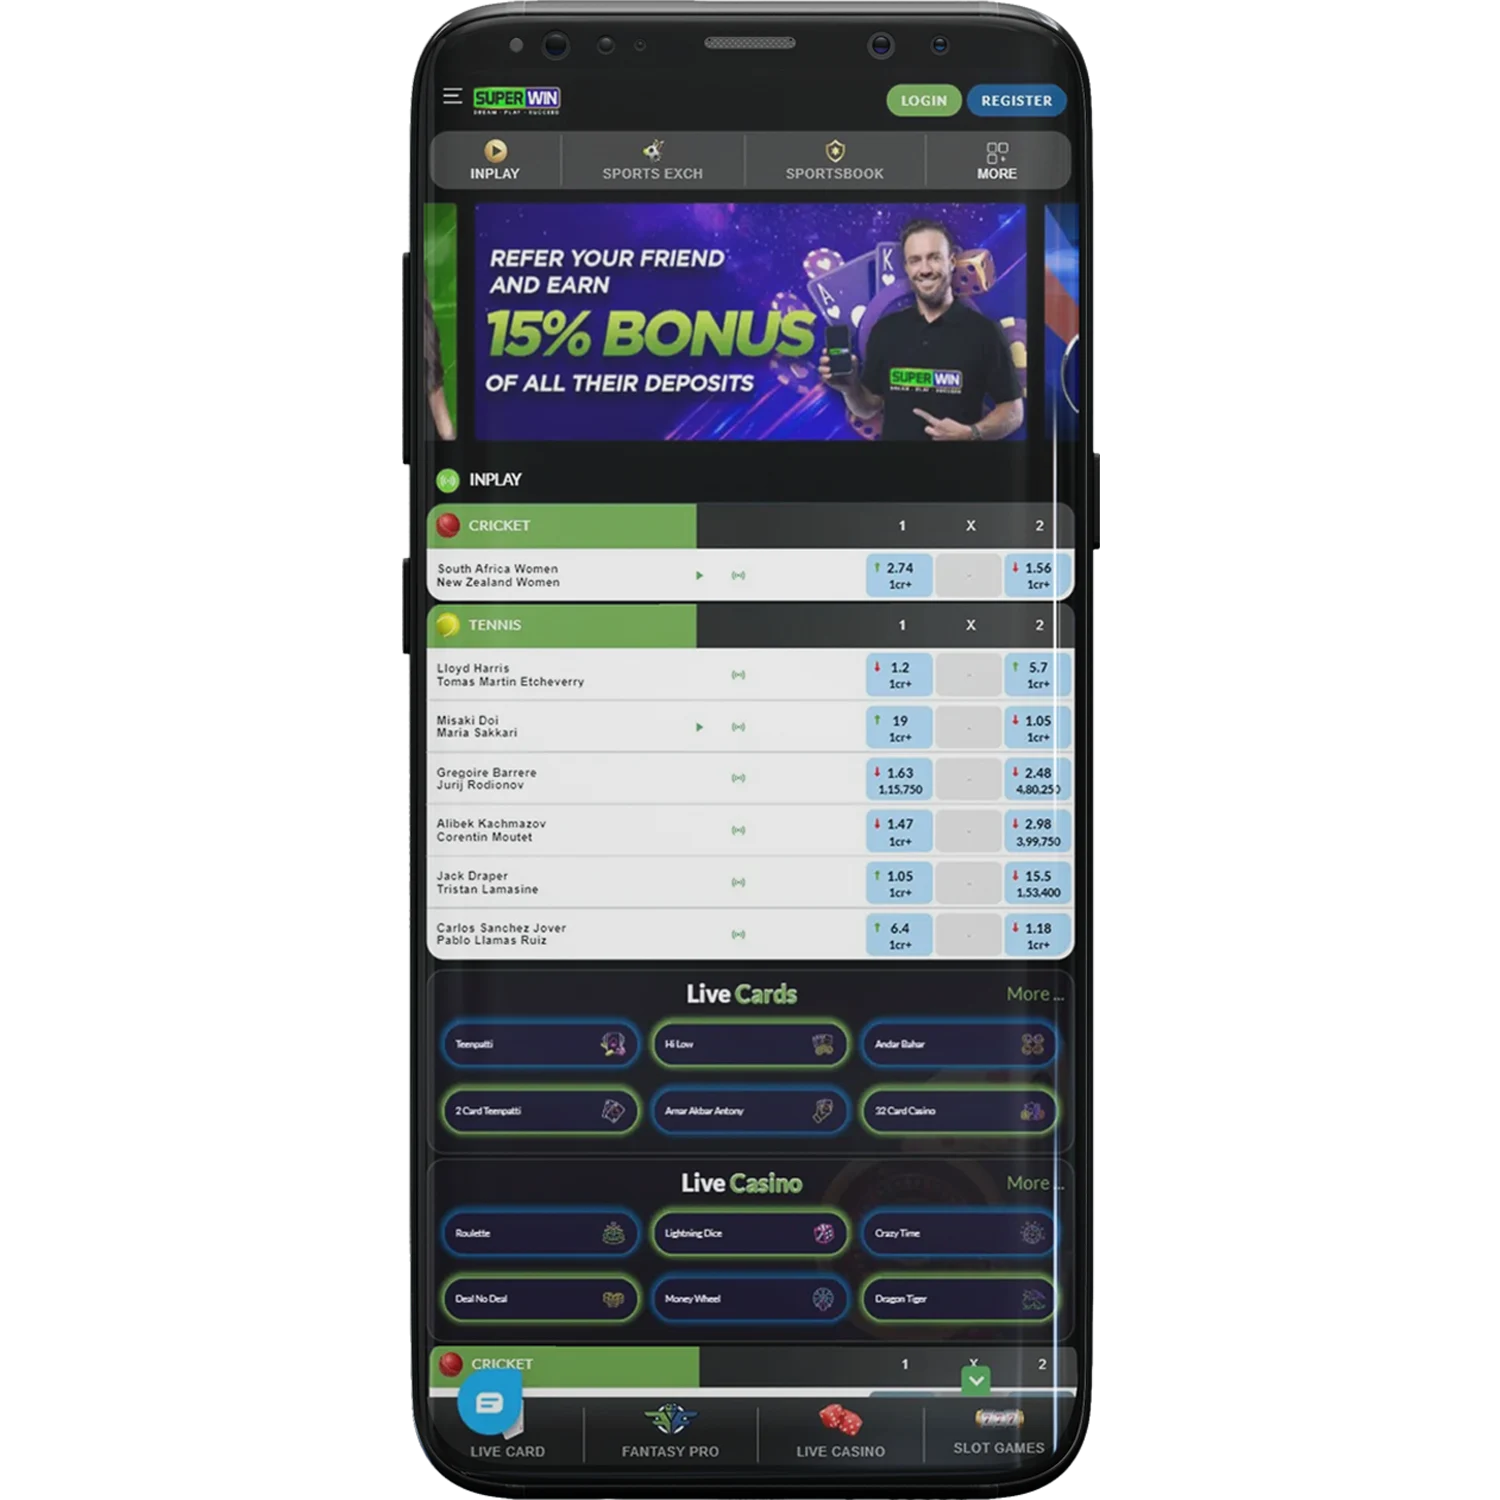 With the Superwin app, bet on sports and play in casinos.